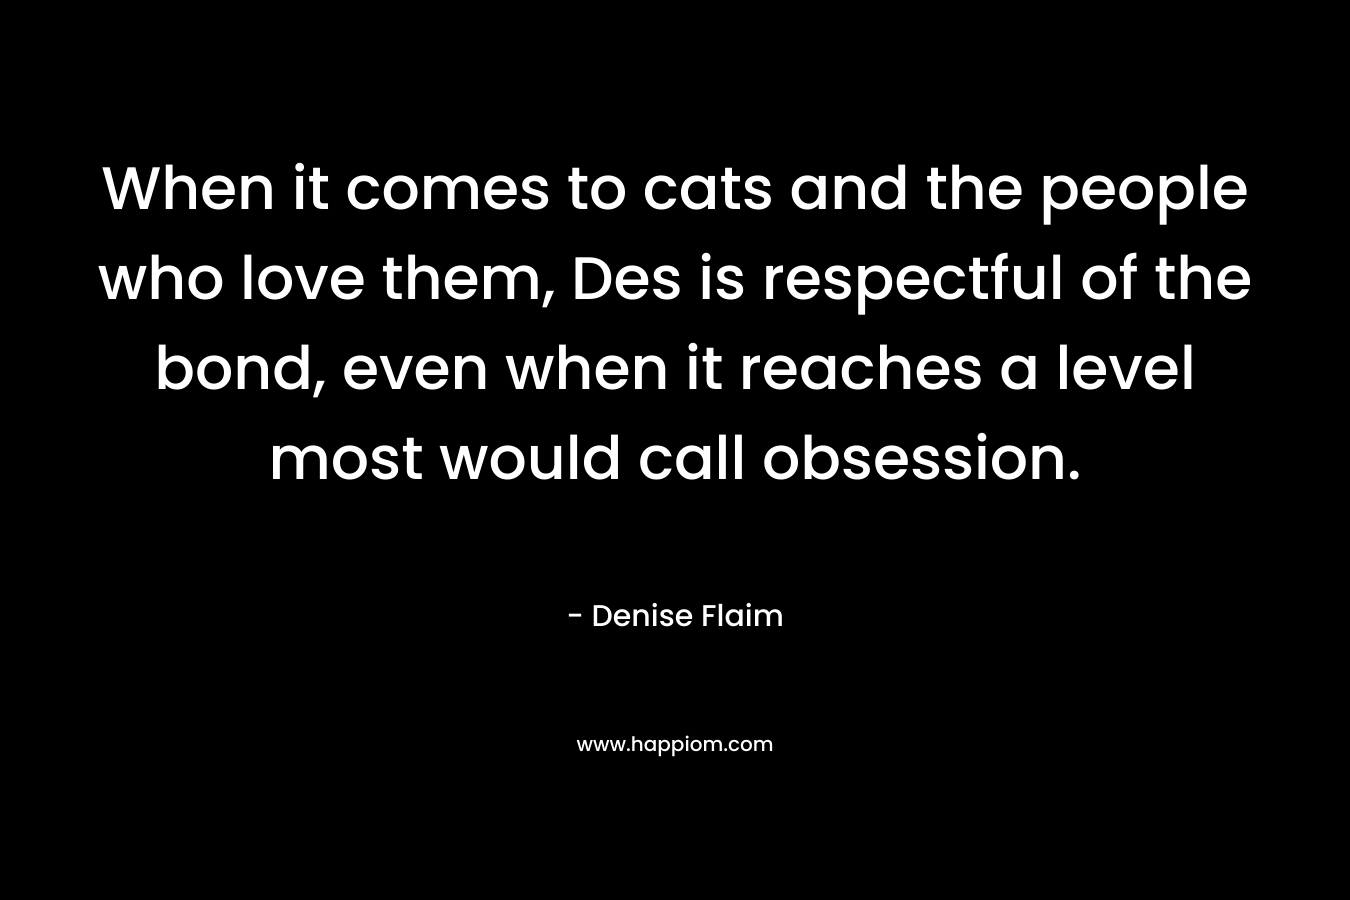 When it comes to cats and the people who love them, Des is respectful of the bond, even when it reaches a level most would call obsession. – Denise Flaim